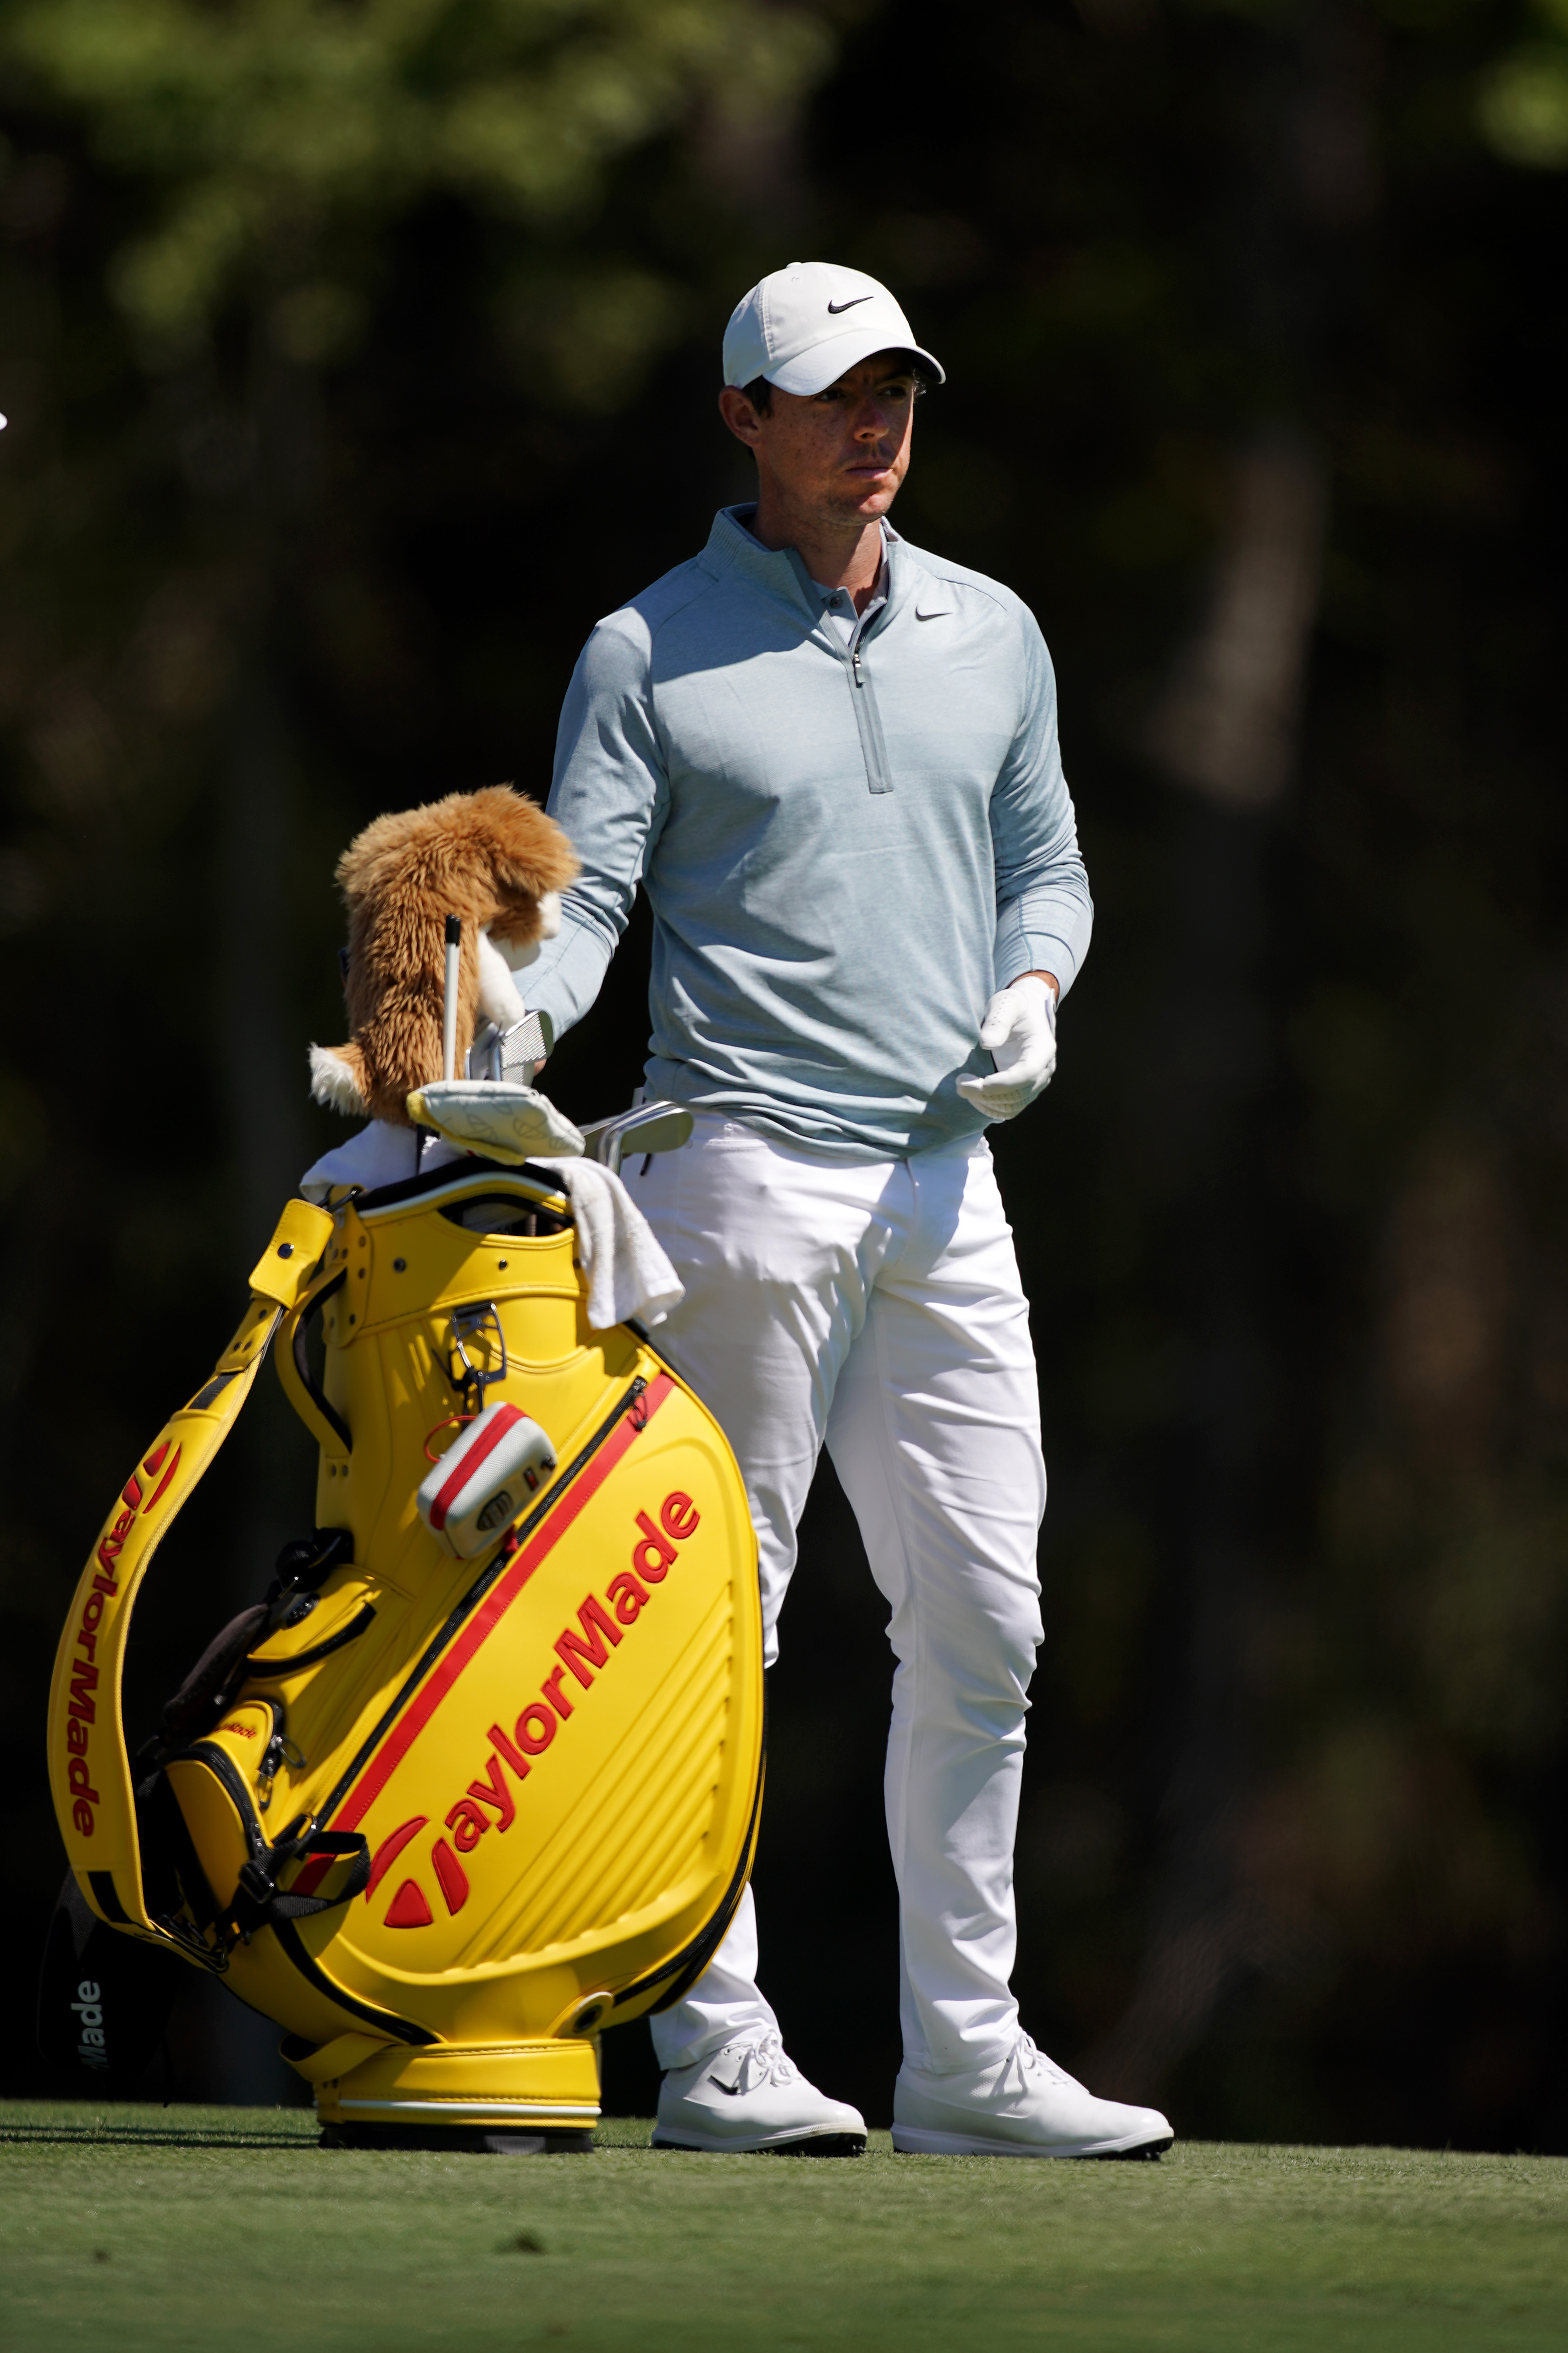 Rory McIlroy: In the bag of The Players champion